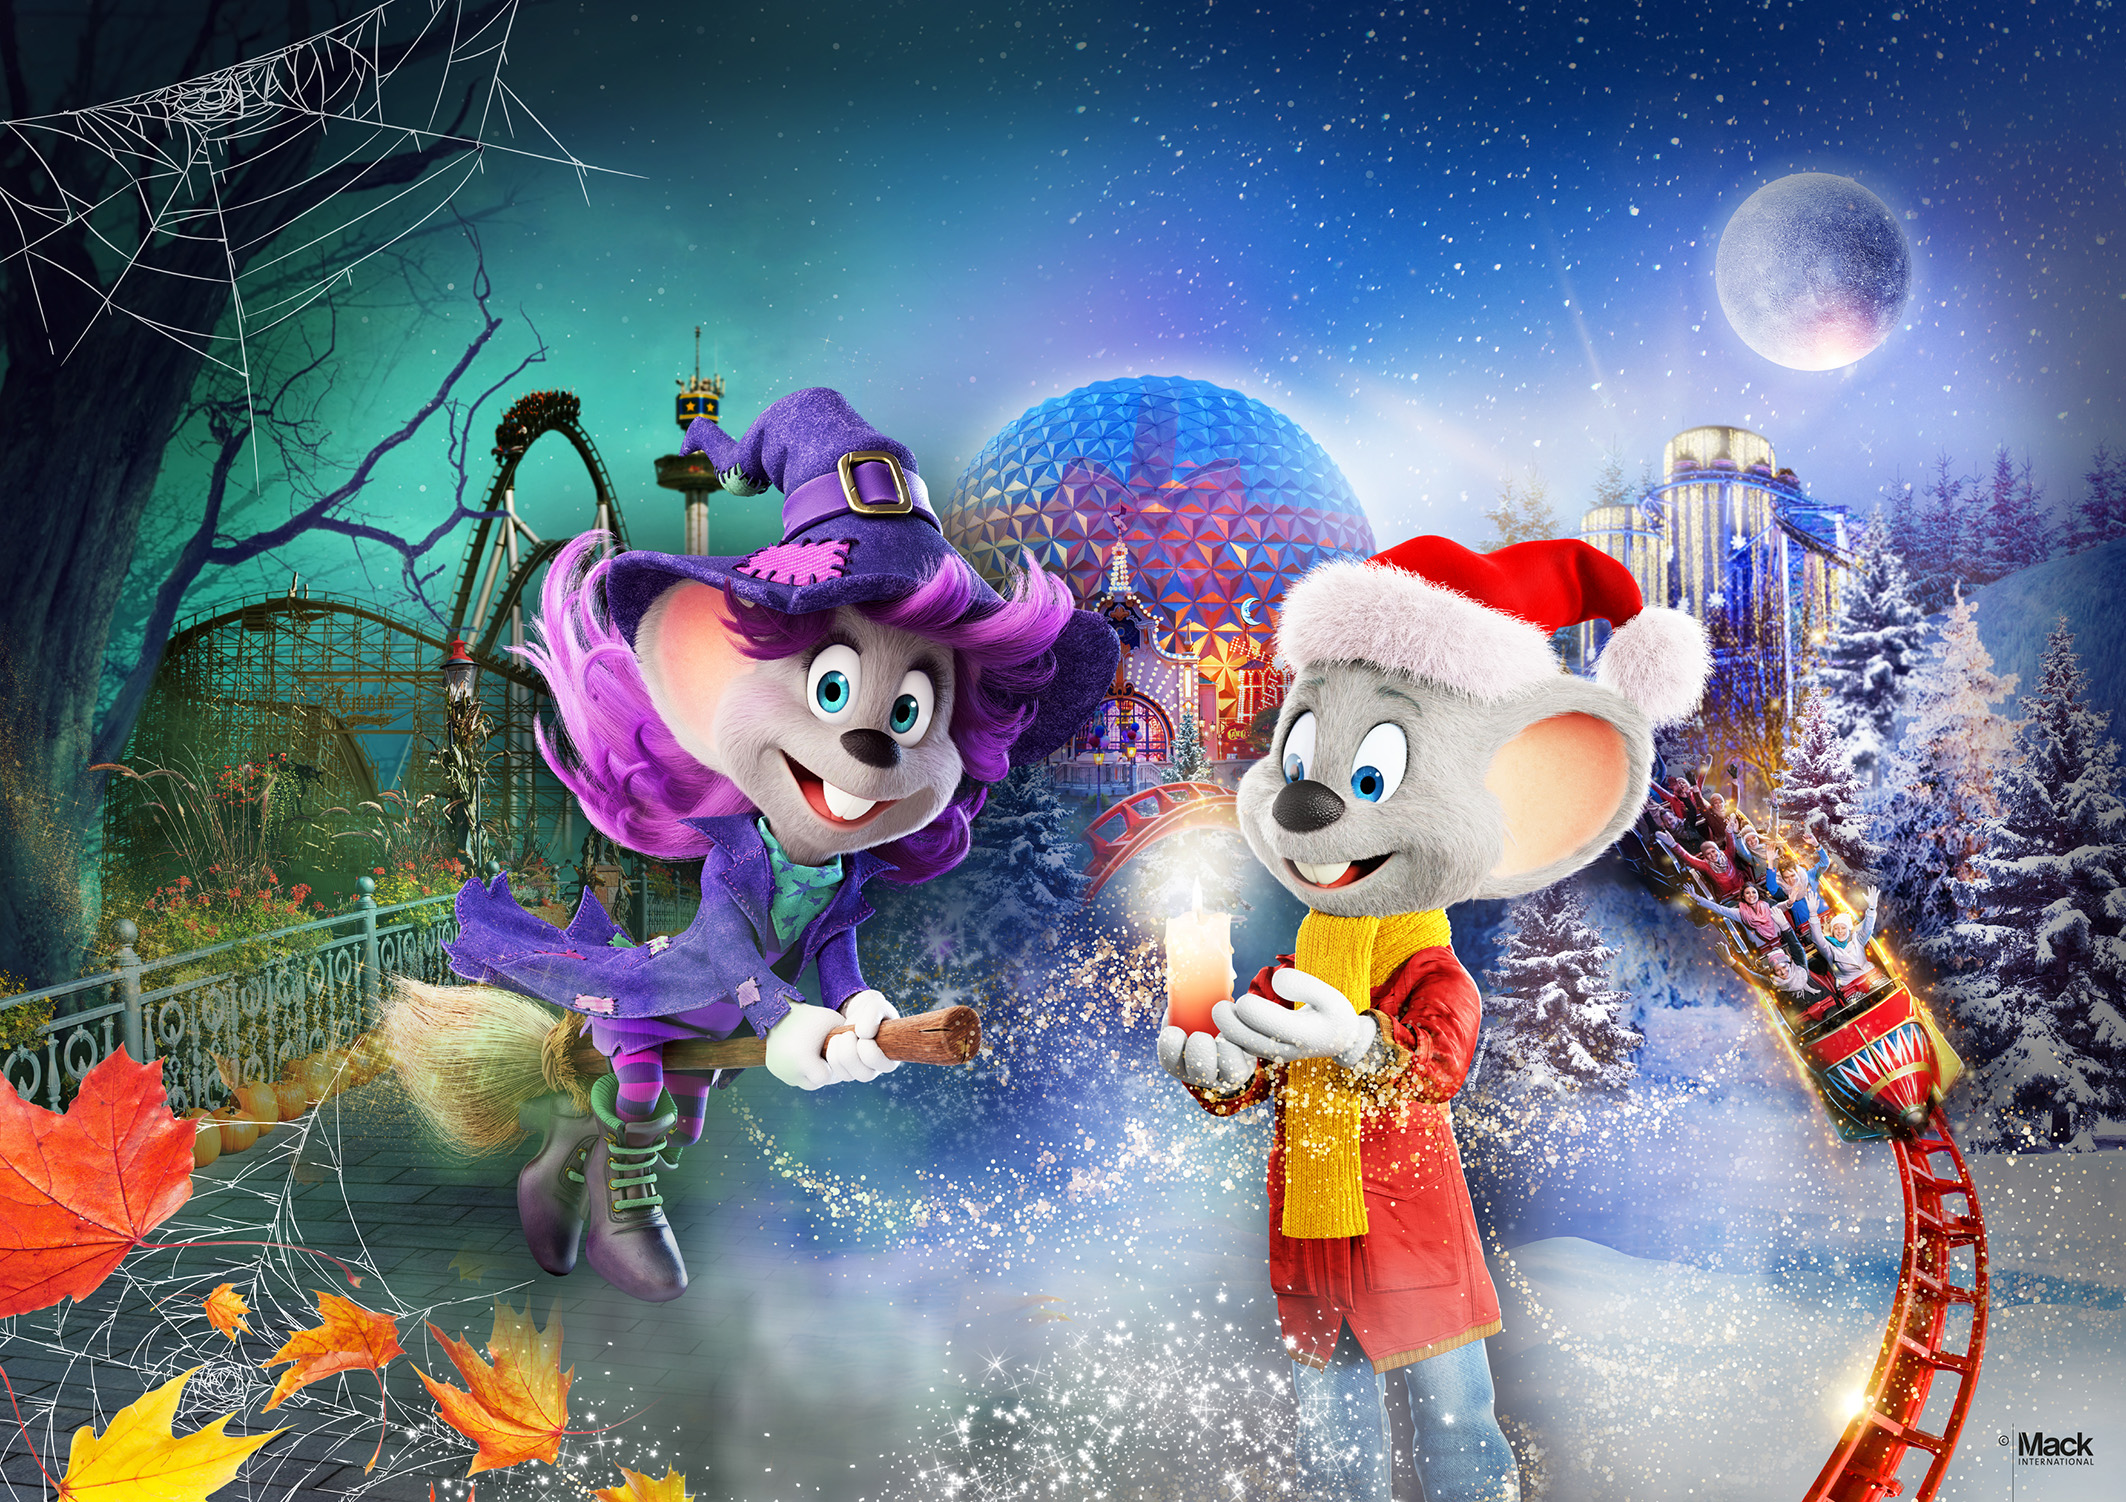 Hallowinter At Europa Park For The First Time Germany S Largest Theme Park Is Open Between The Halloween And Winter Seasons Amusement Today